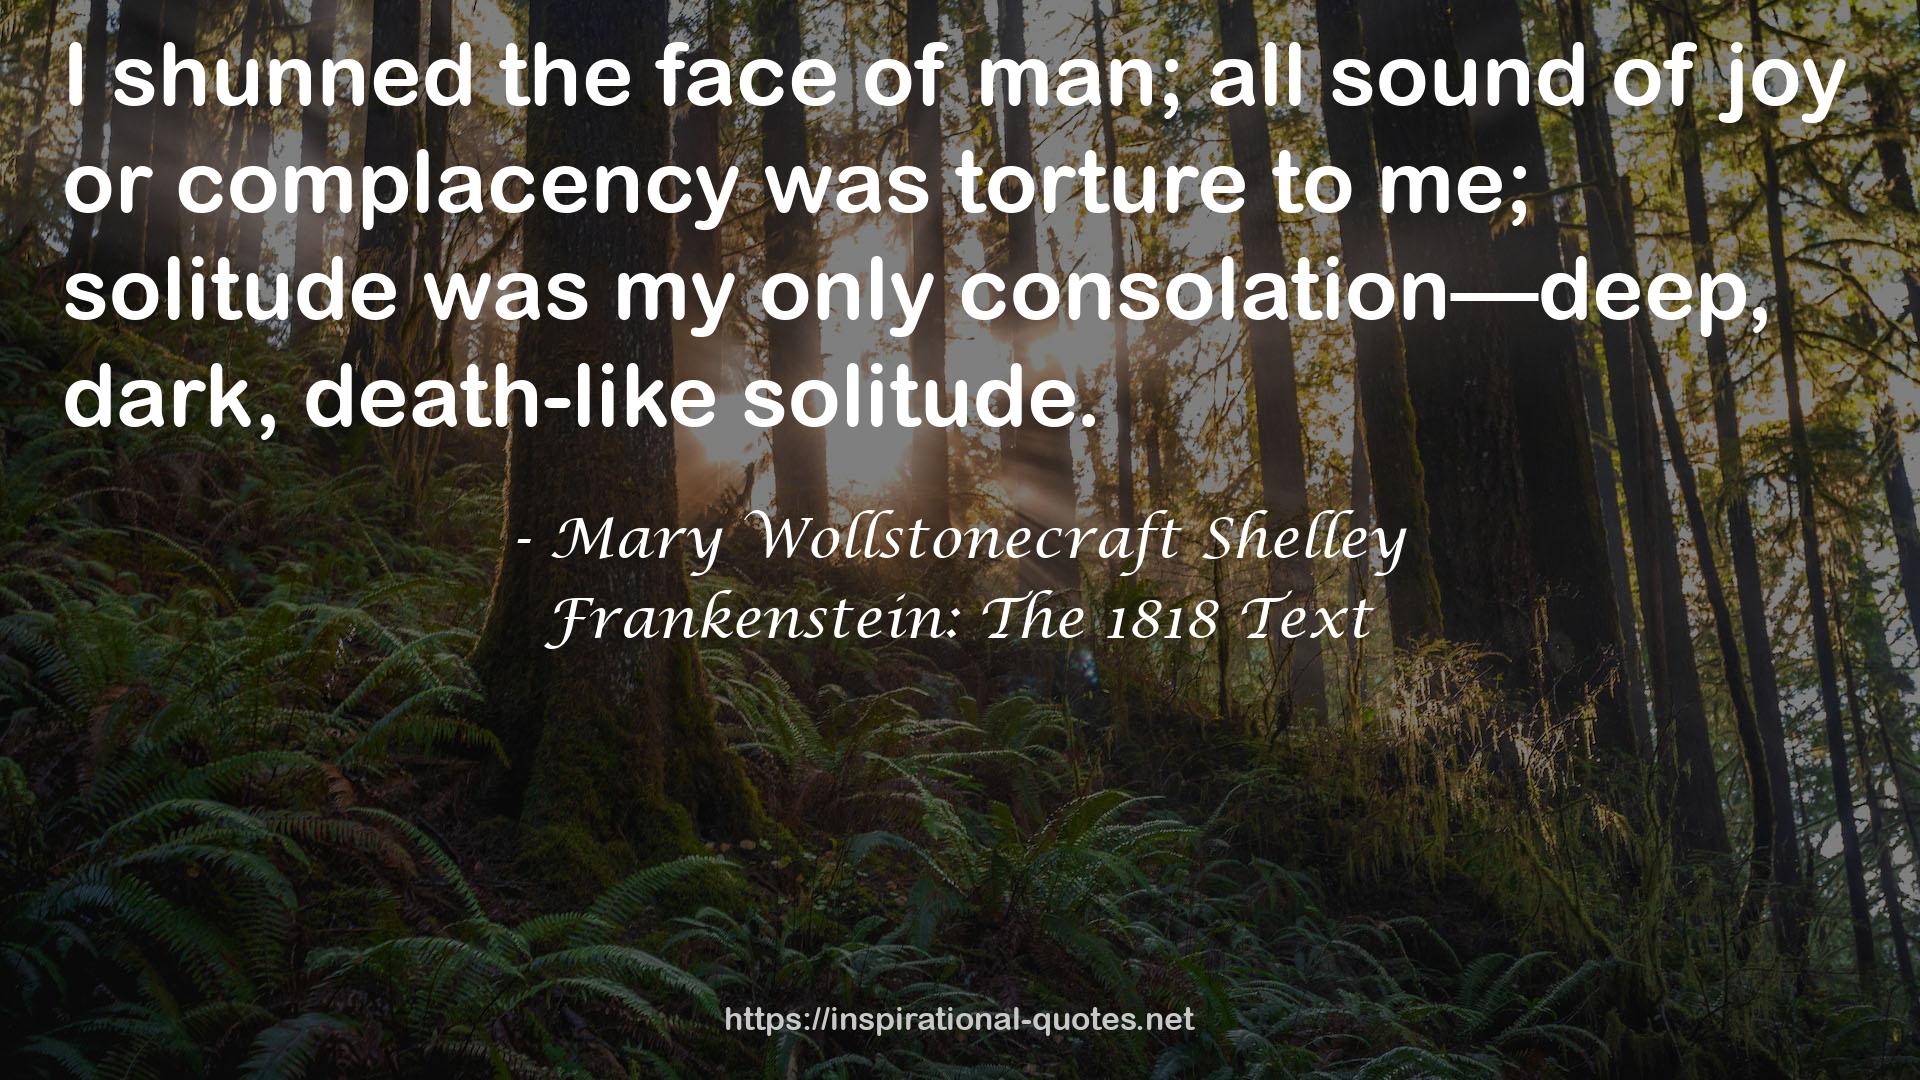 Mary Wollstonecraft Shelley QUOTES